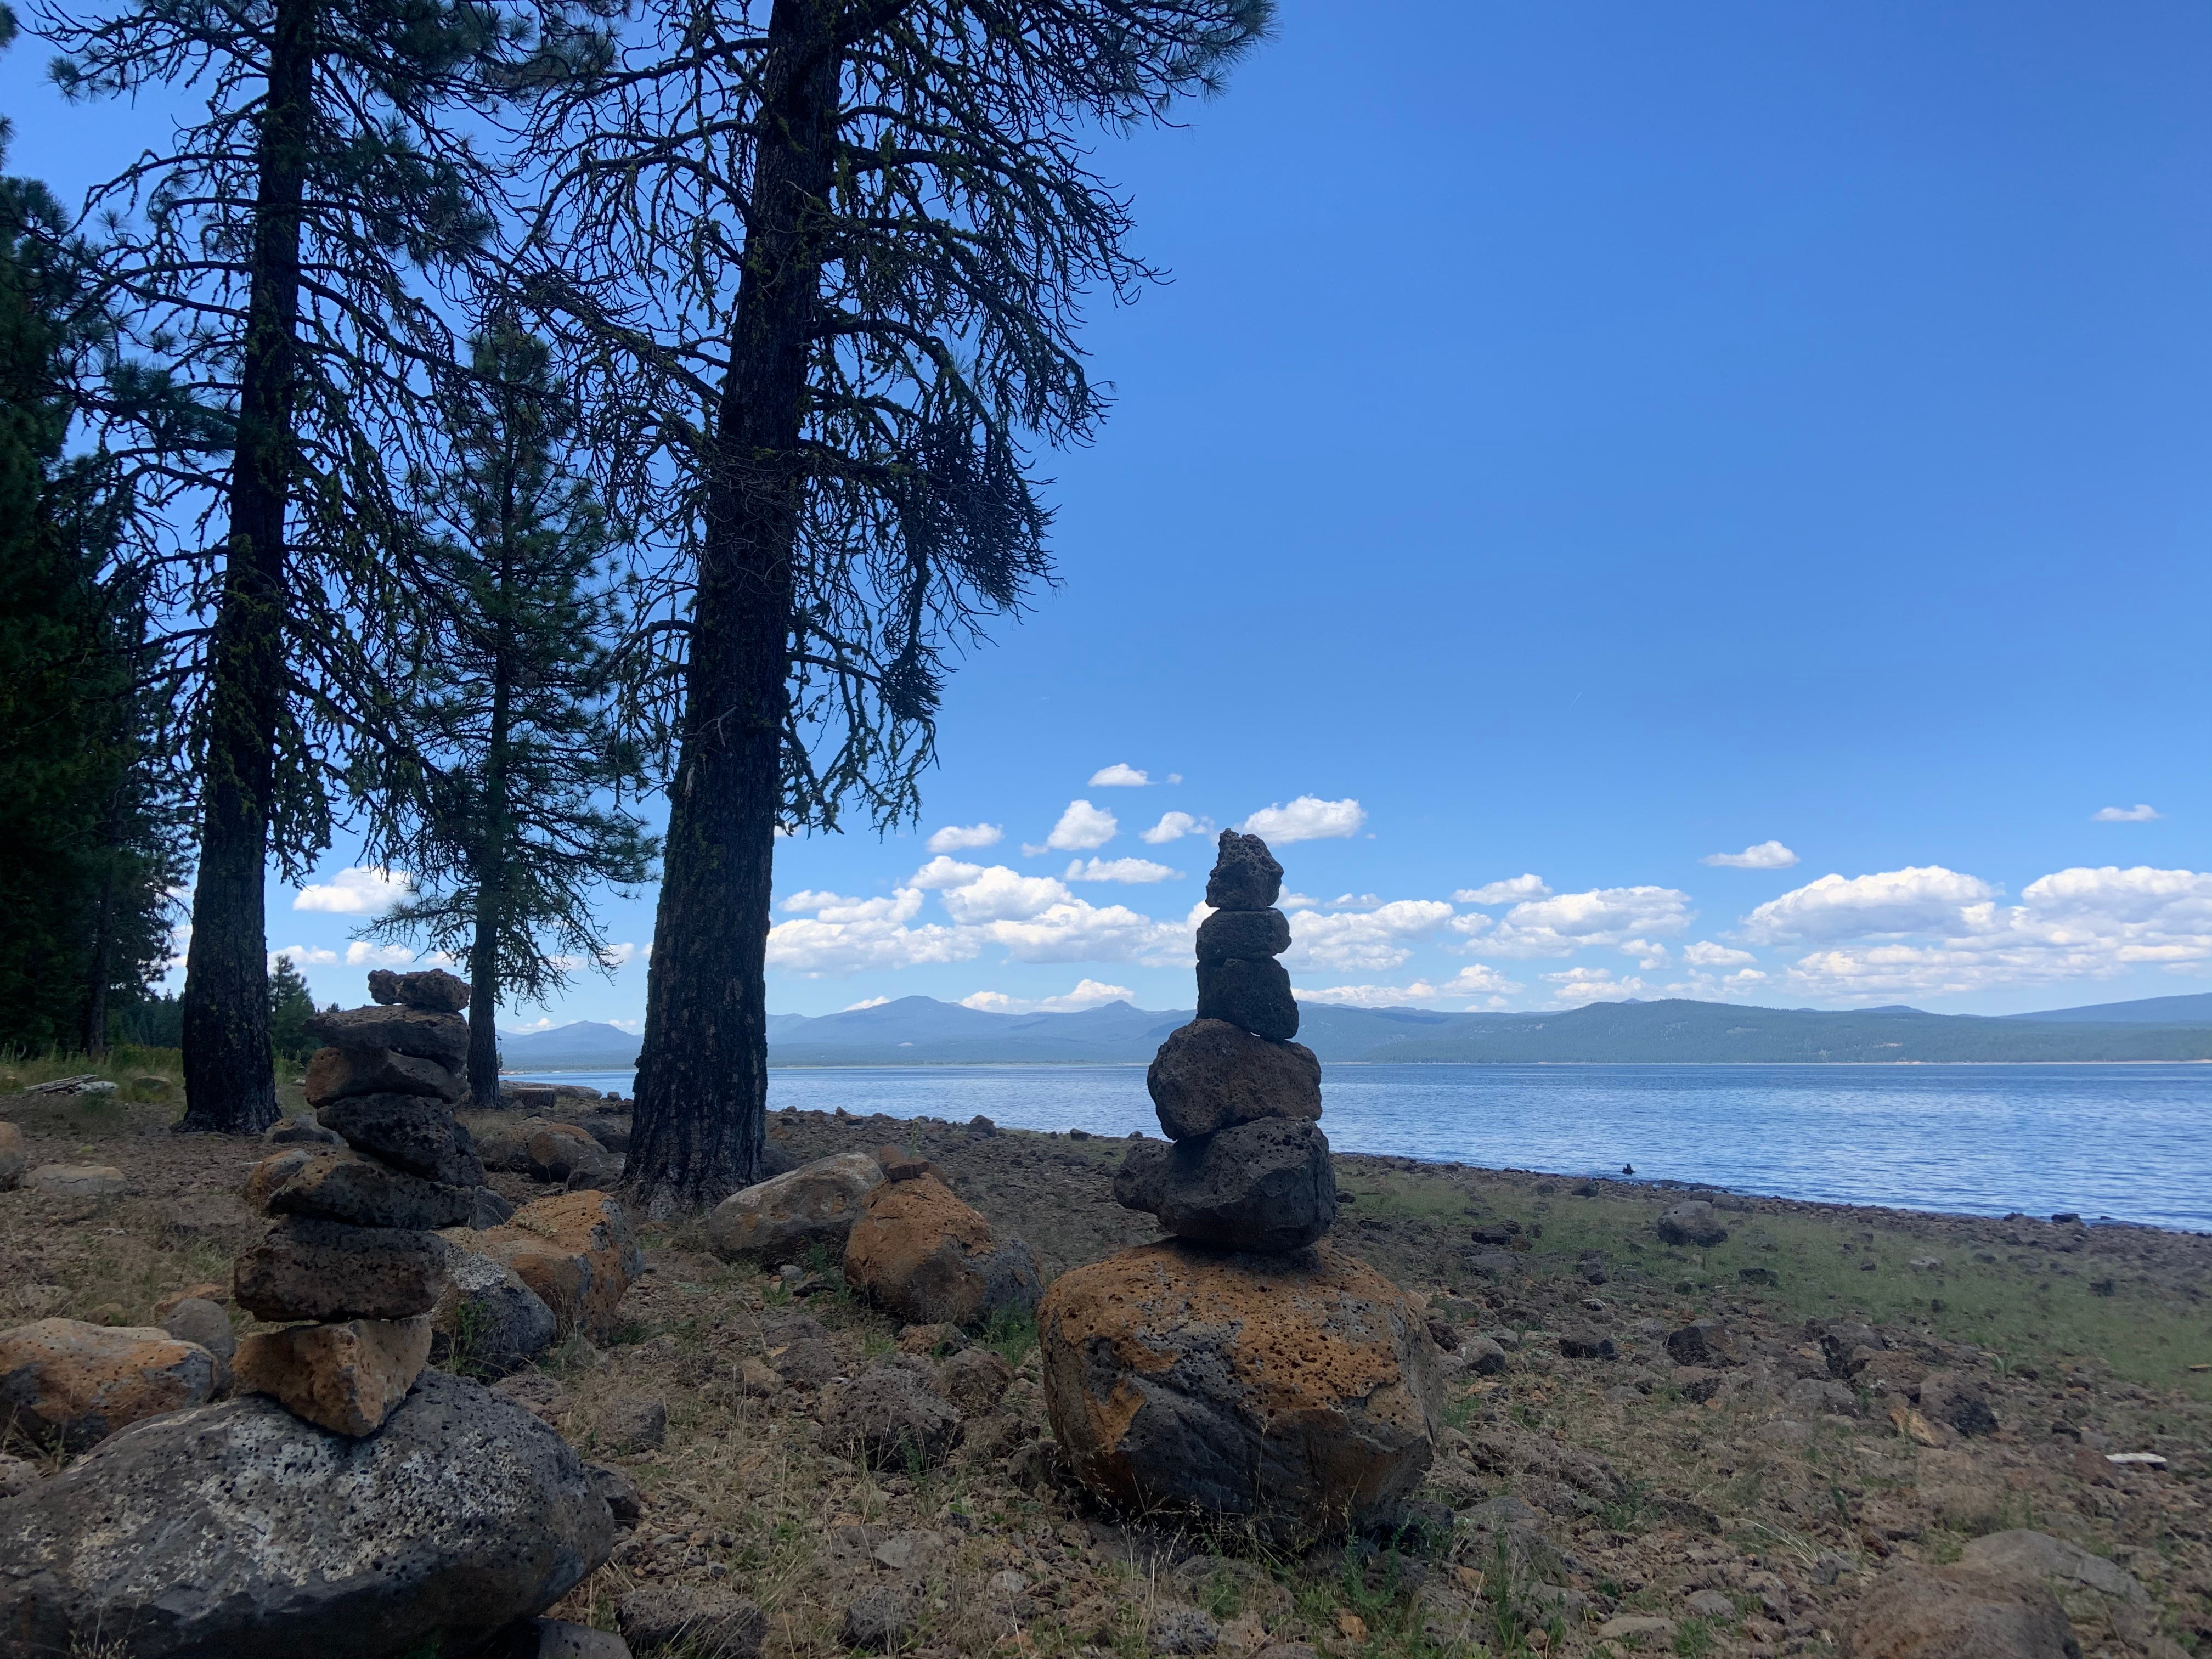 Camper submitted image from Rocky Point Campground - Lake Almanor - 2